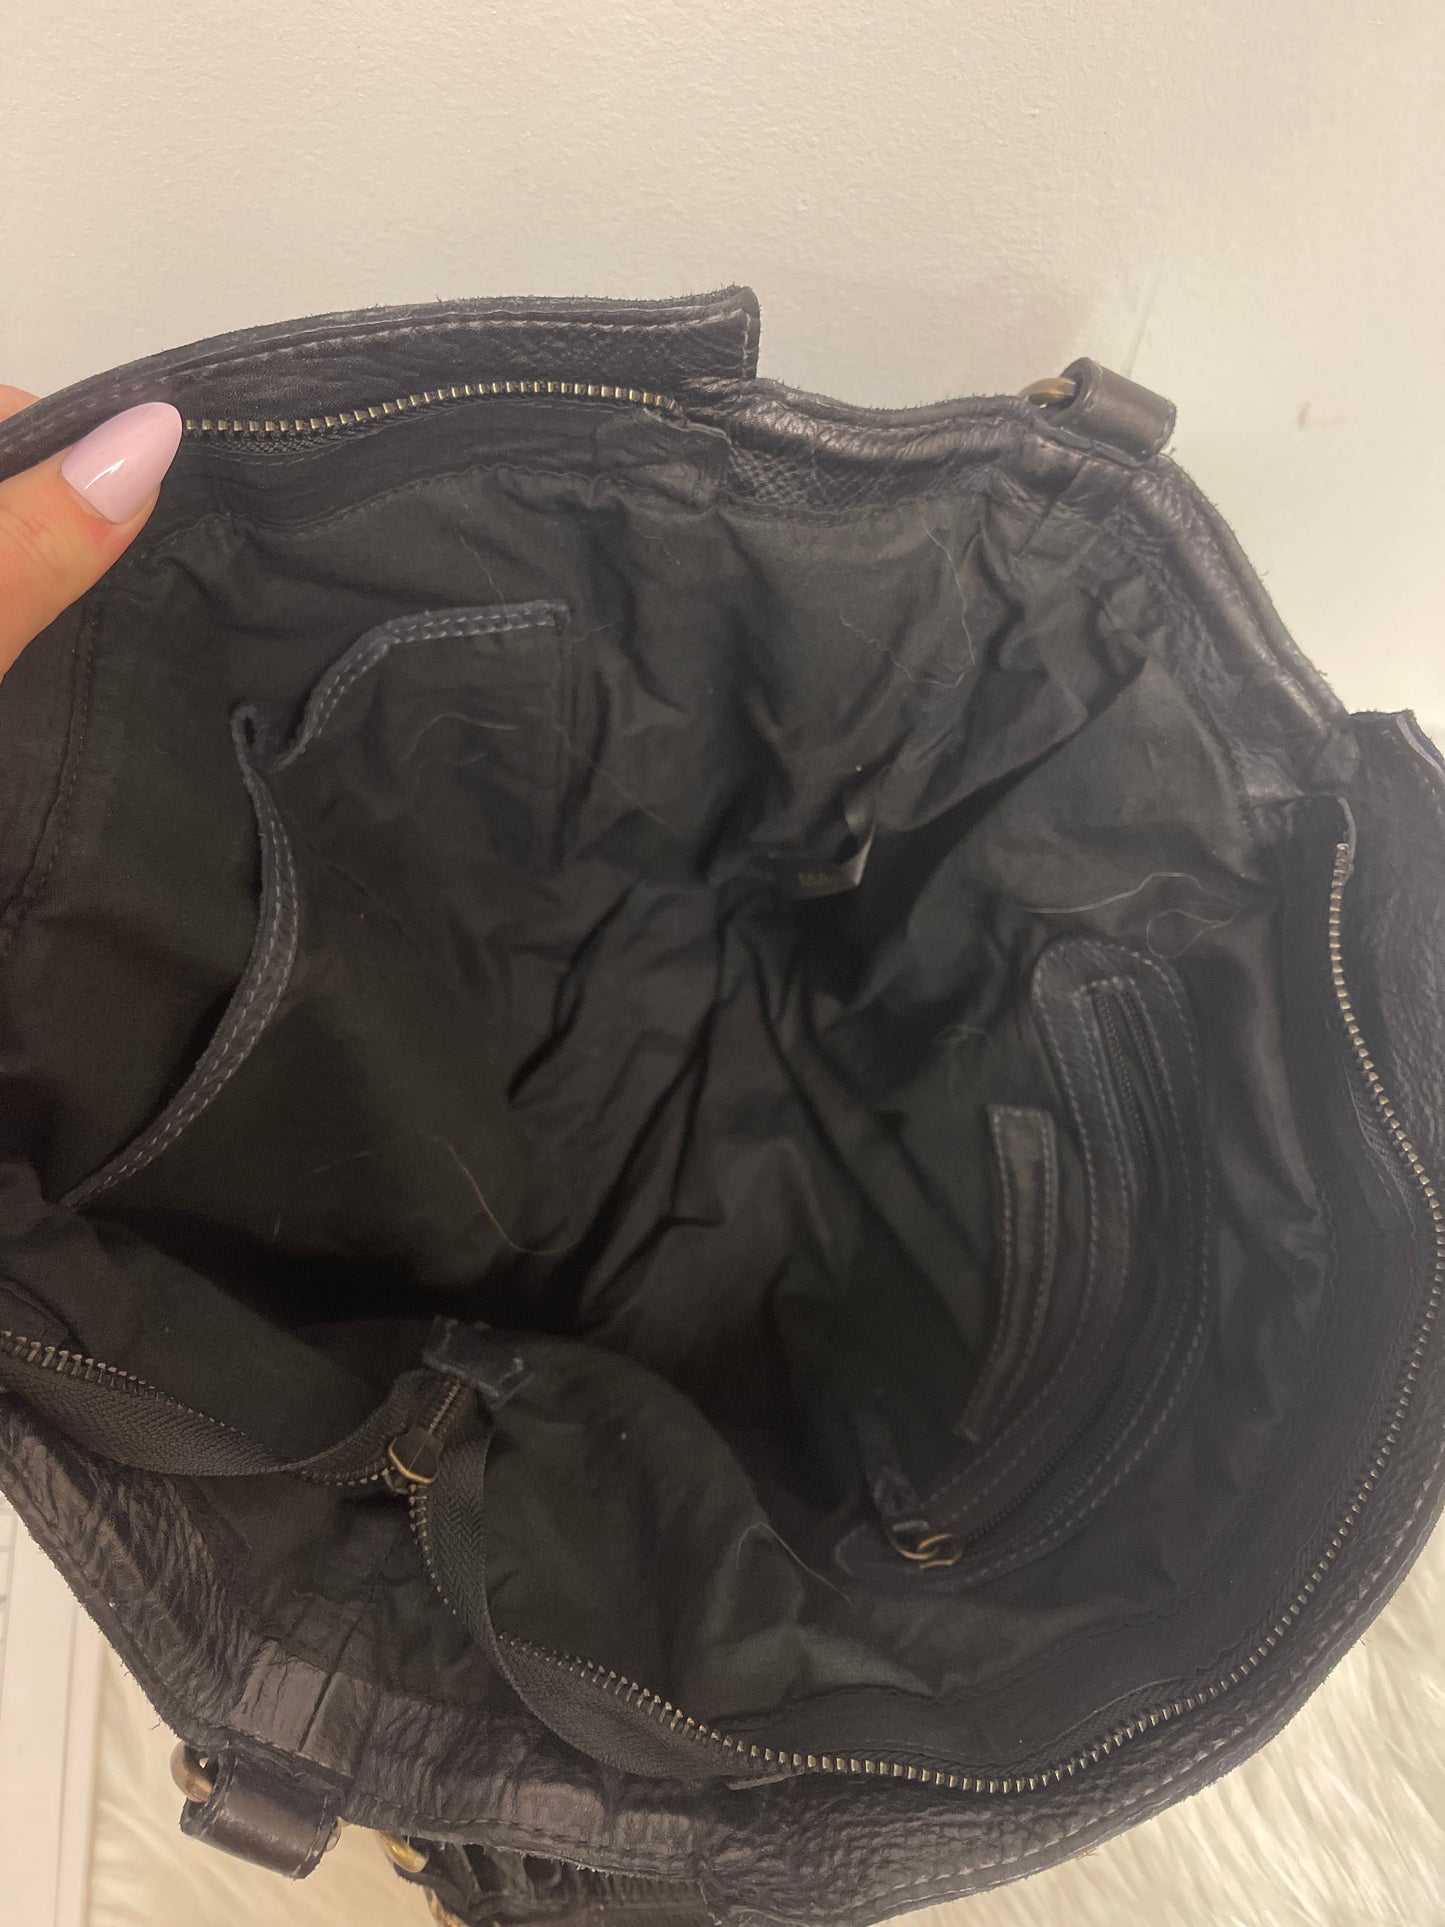 Handbag By Clothes Mentor  Size: Large